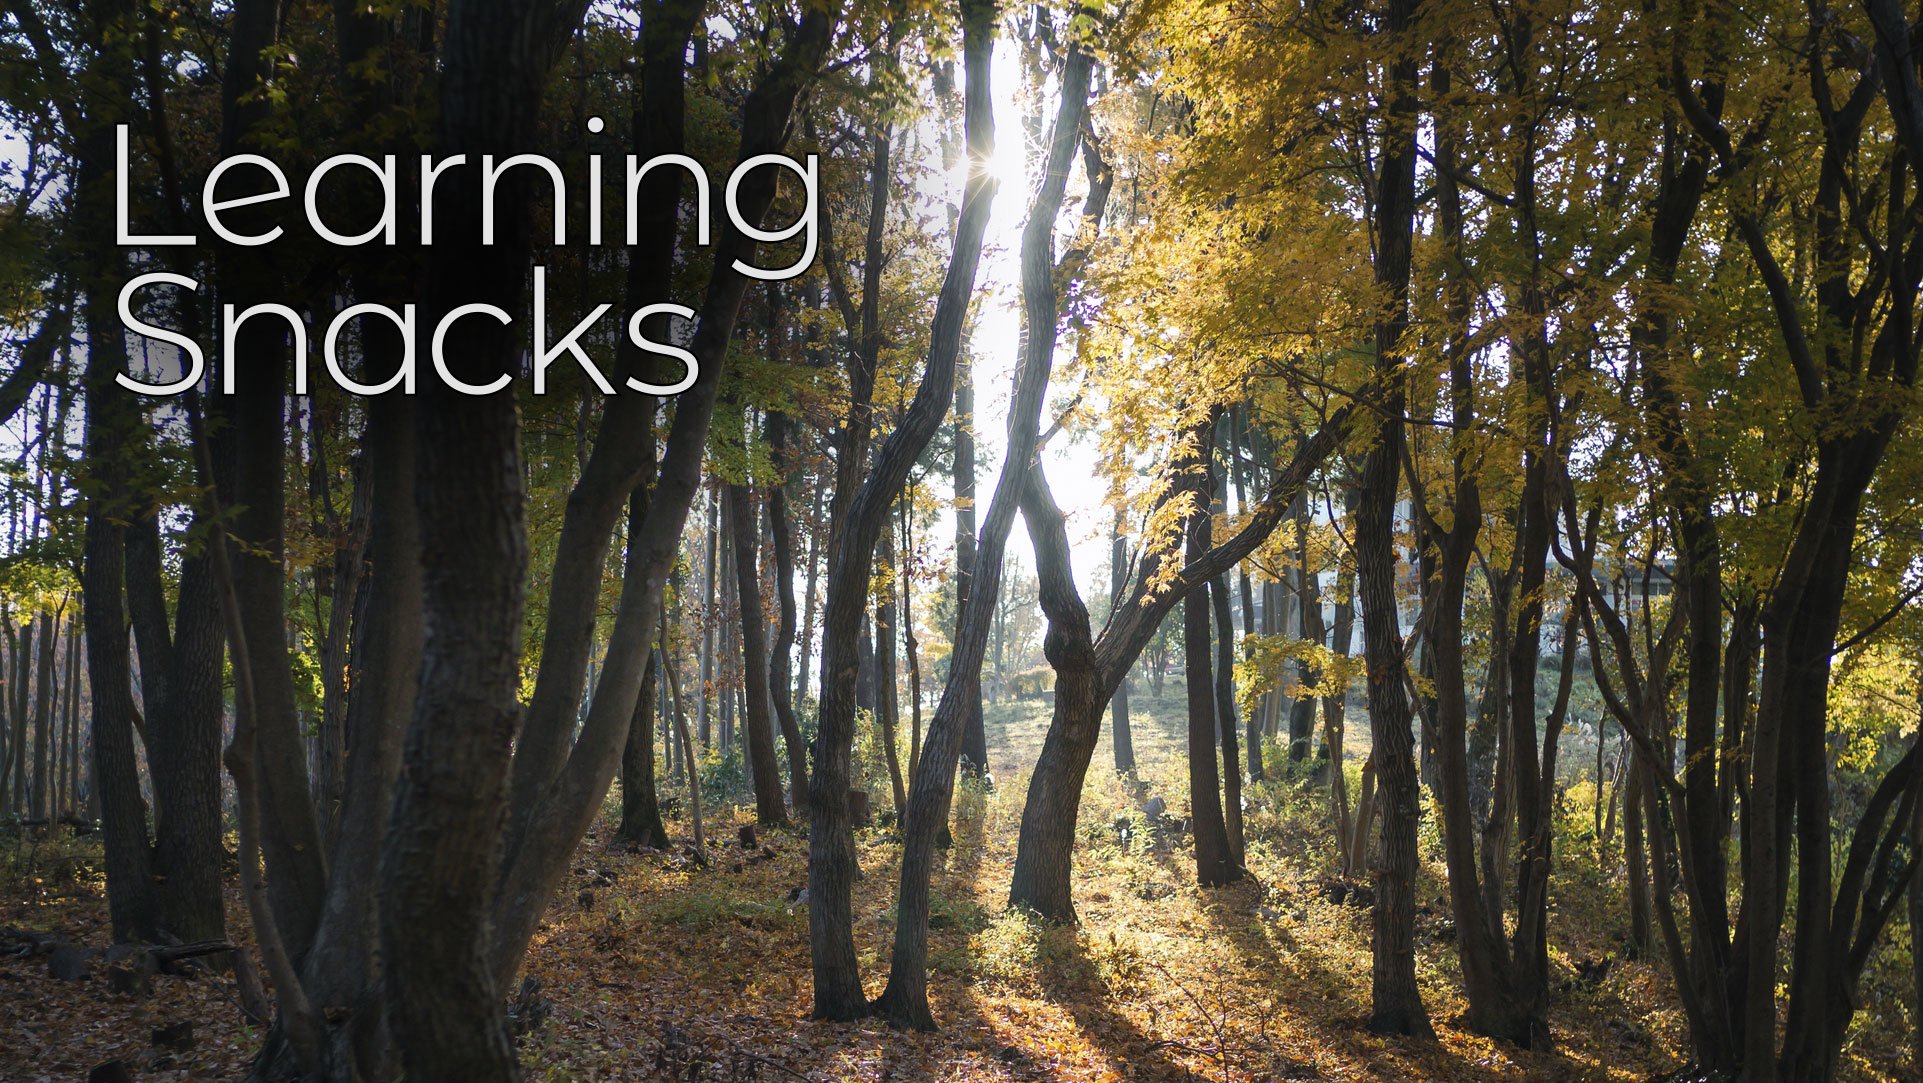 Learning Snacks - The Autumn Equinox